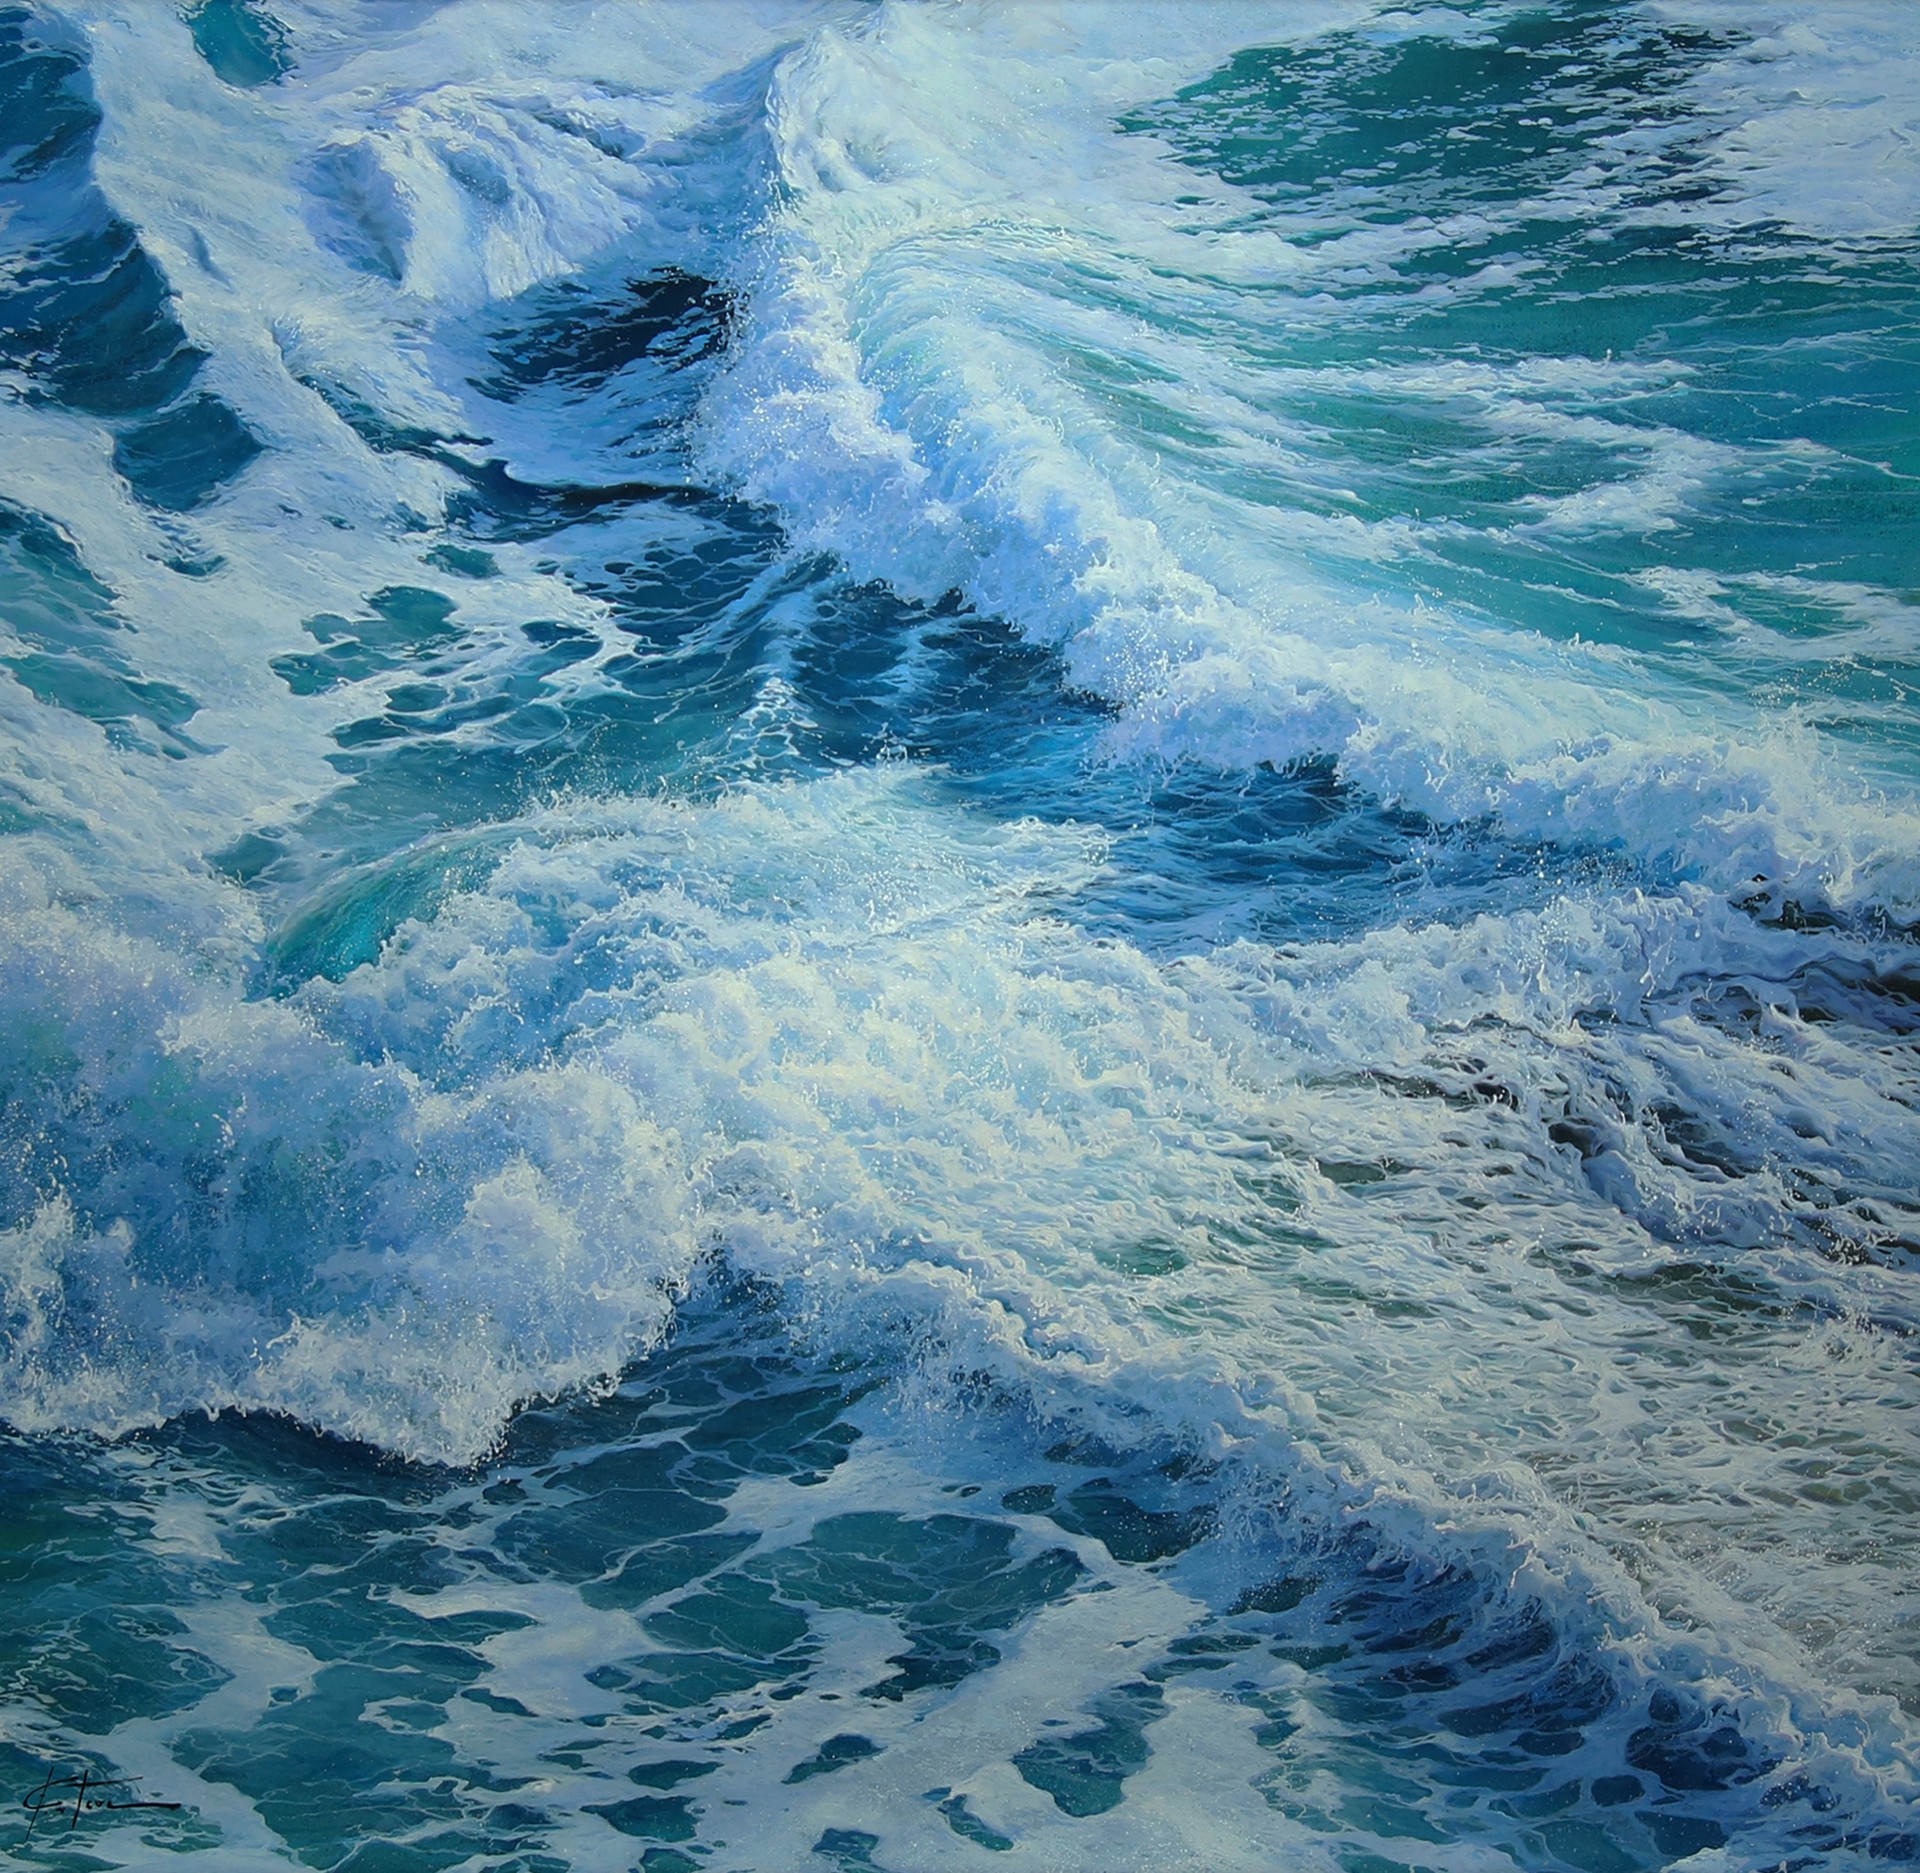 "Strong Currents" by Marc Esteve